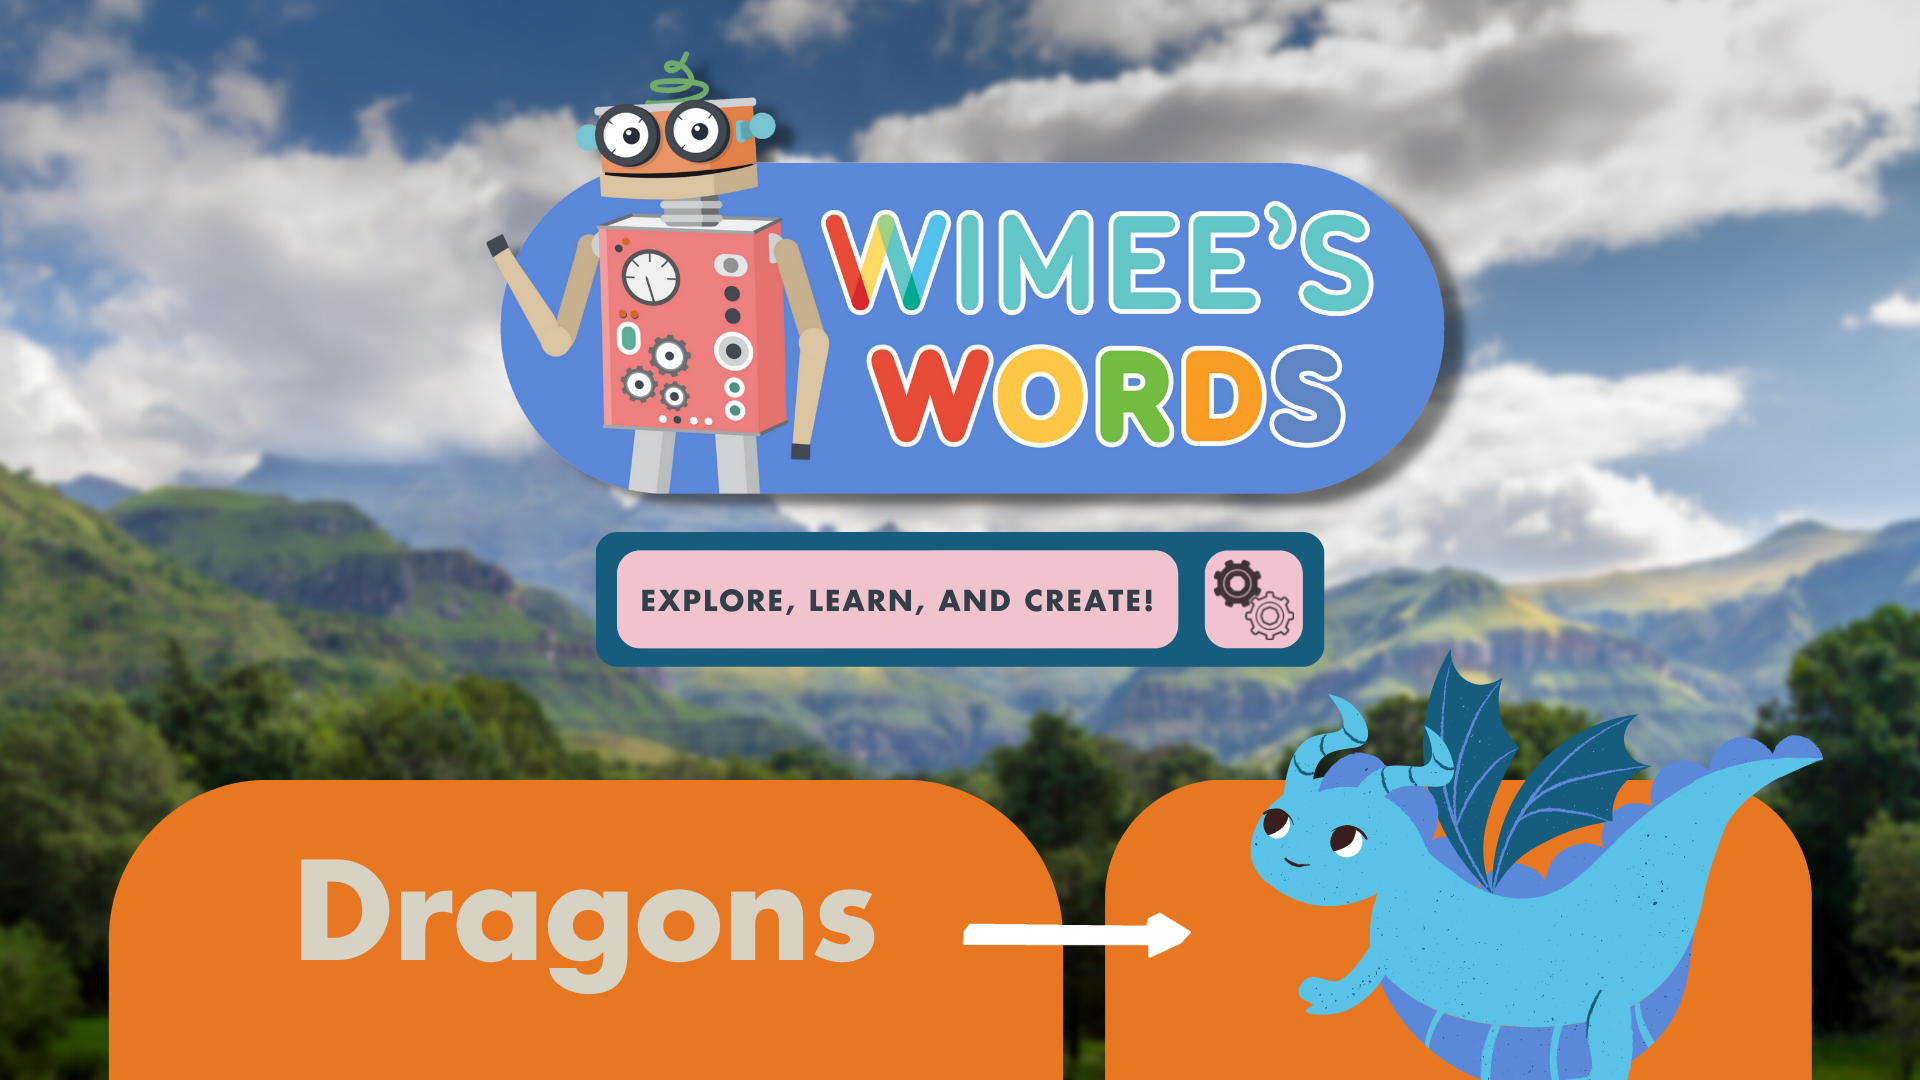 A photo of a mountain and sky landscape. The Wimee's Words logo, a graphic of a blue dragon, and the title "Dragons" are on the image.